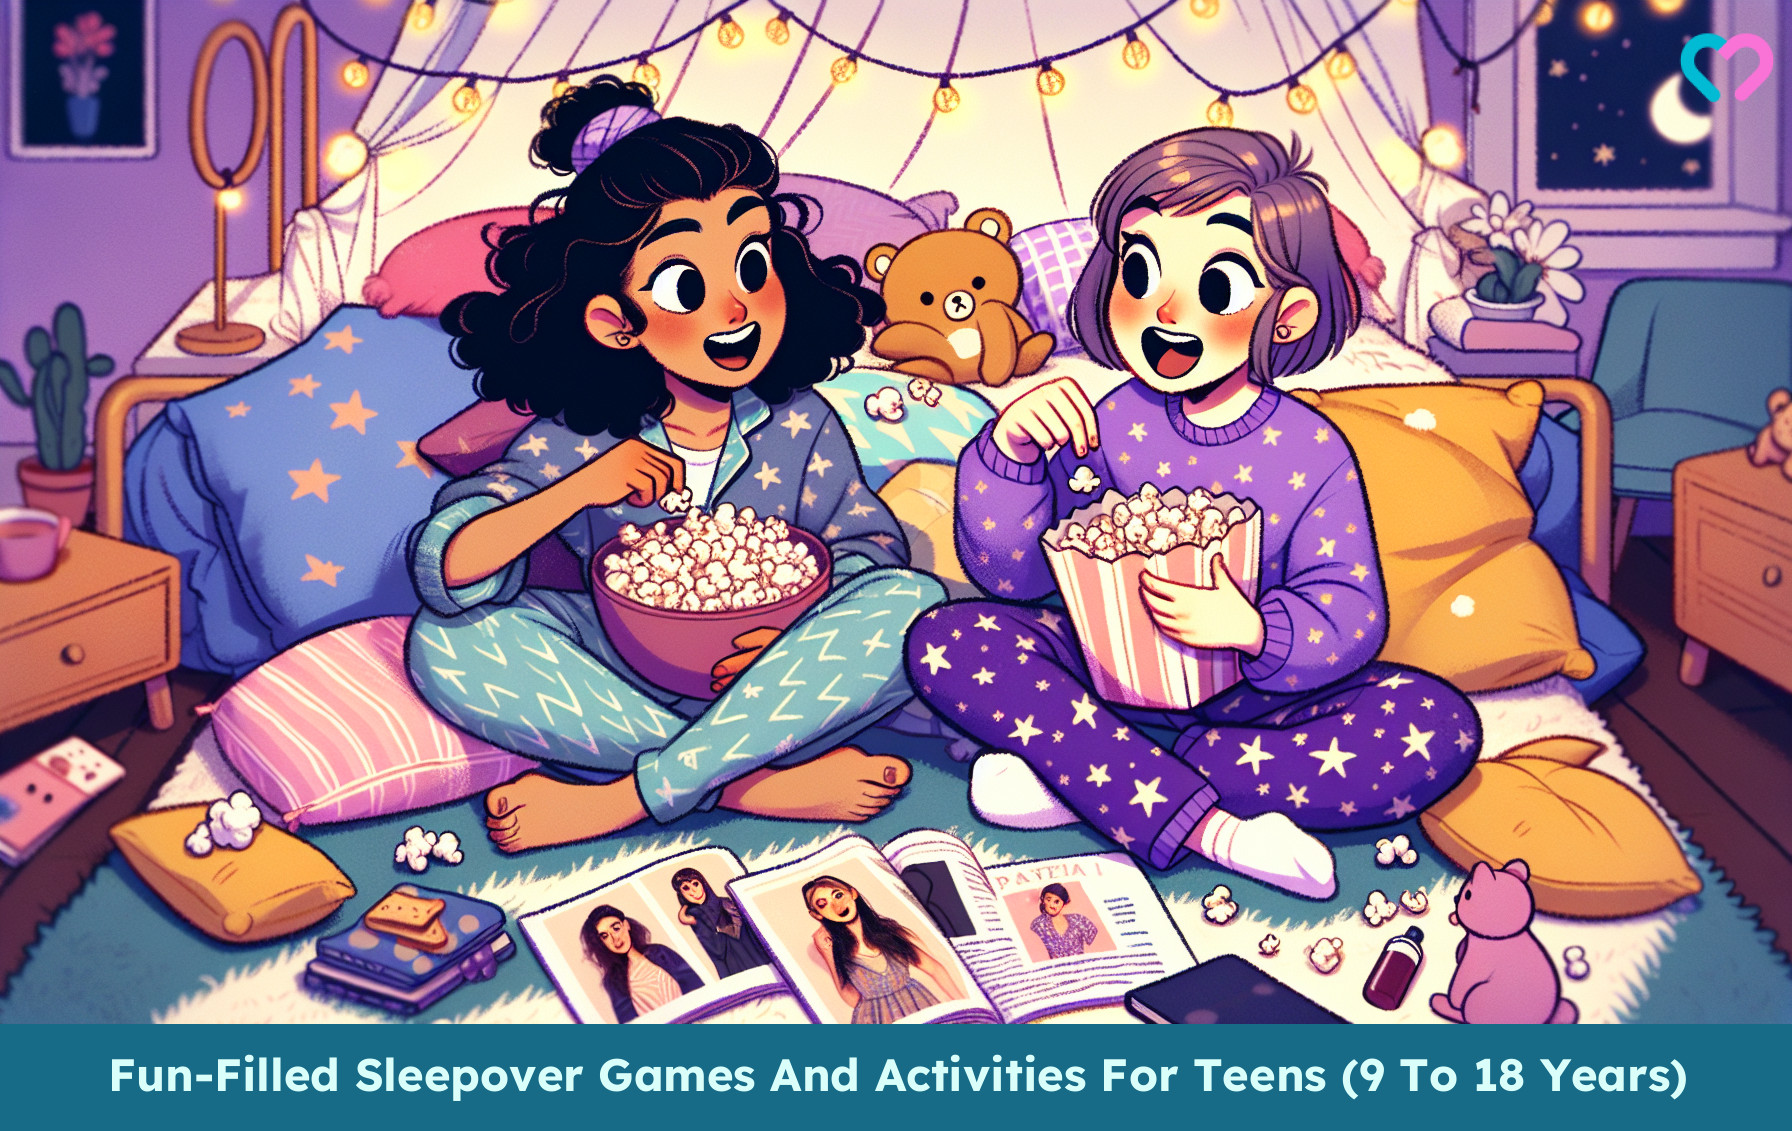 Sleepover Games And Activities For Teens_illustration